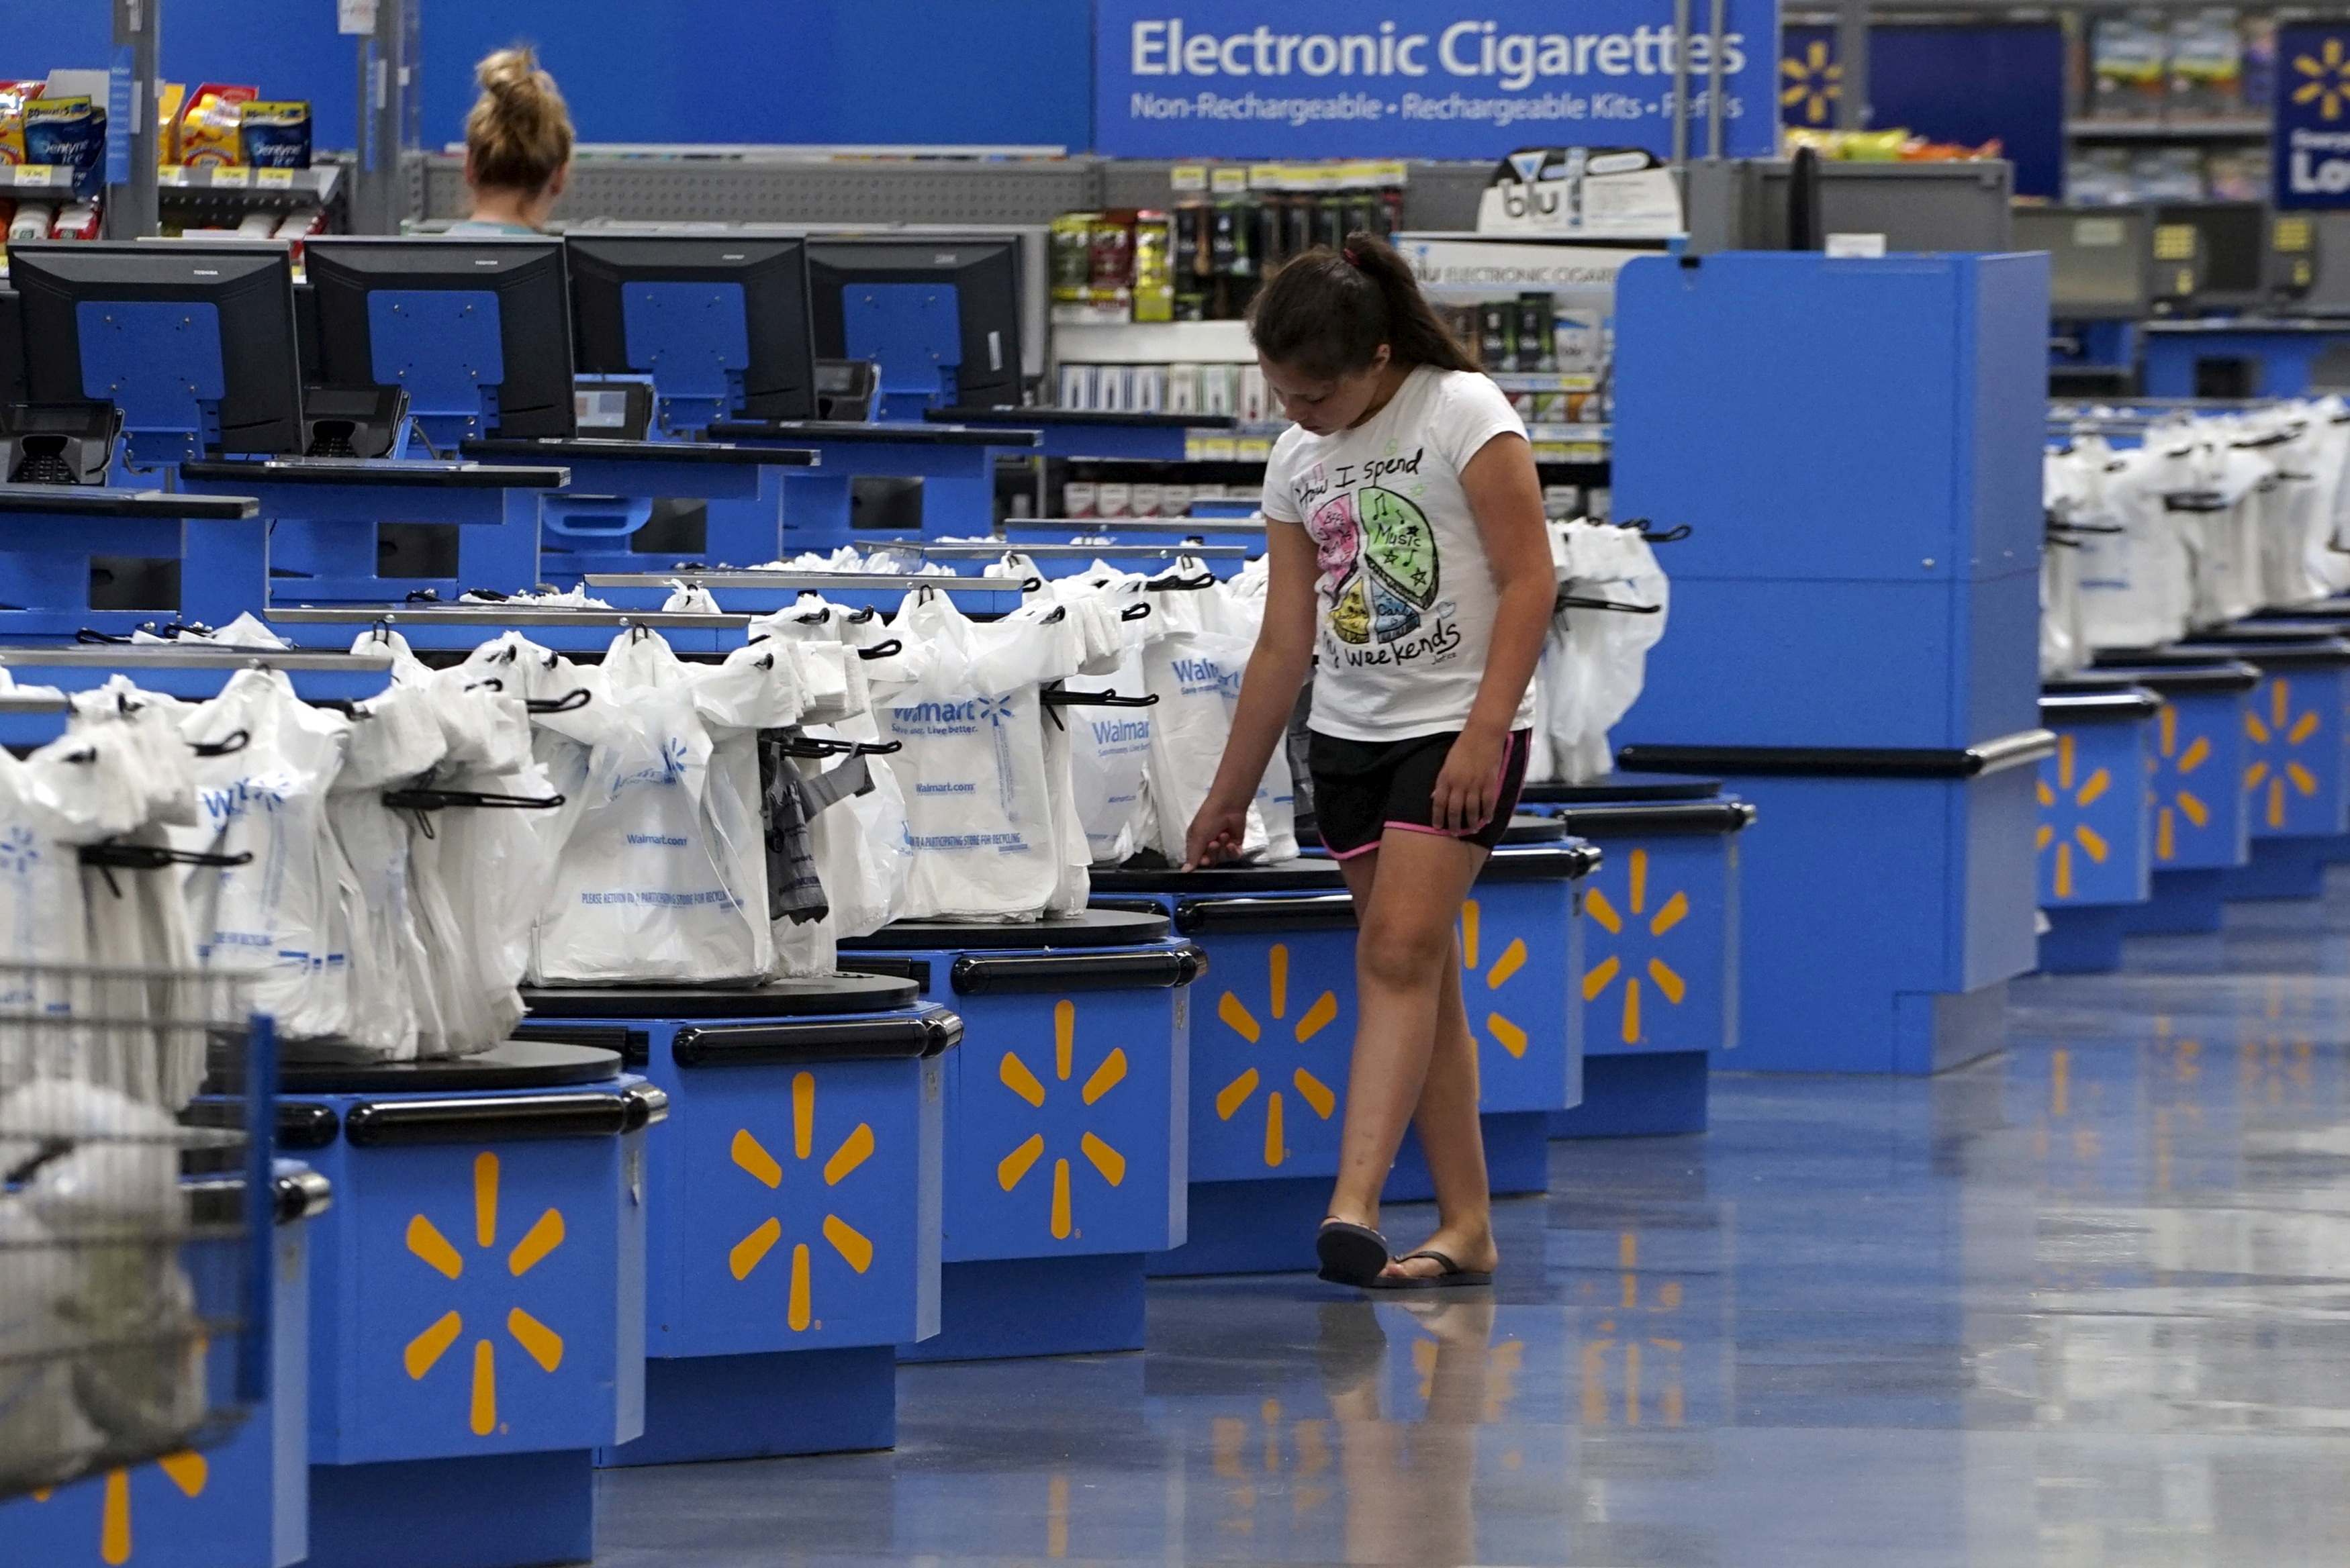 Walmart Cuts Prices on Clothes to Attract Inflation-Hit Shoppers